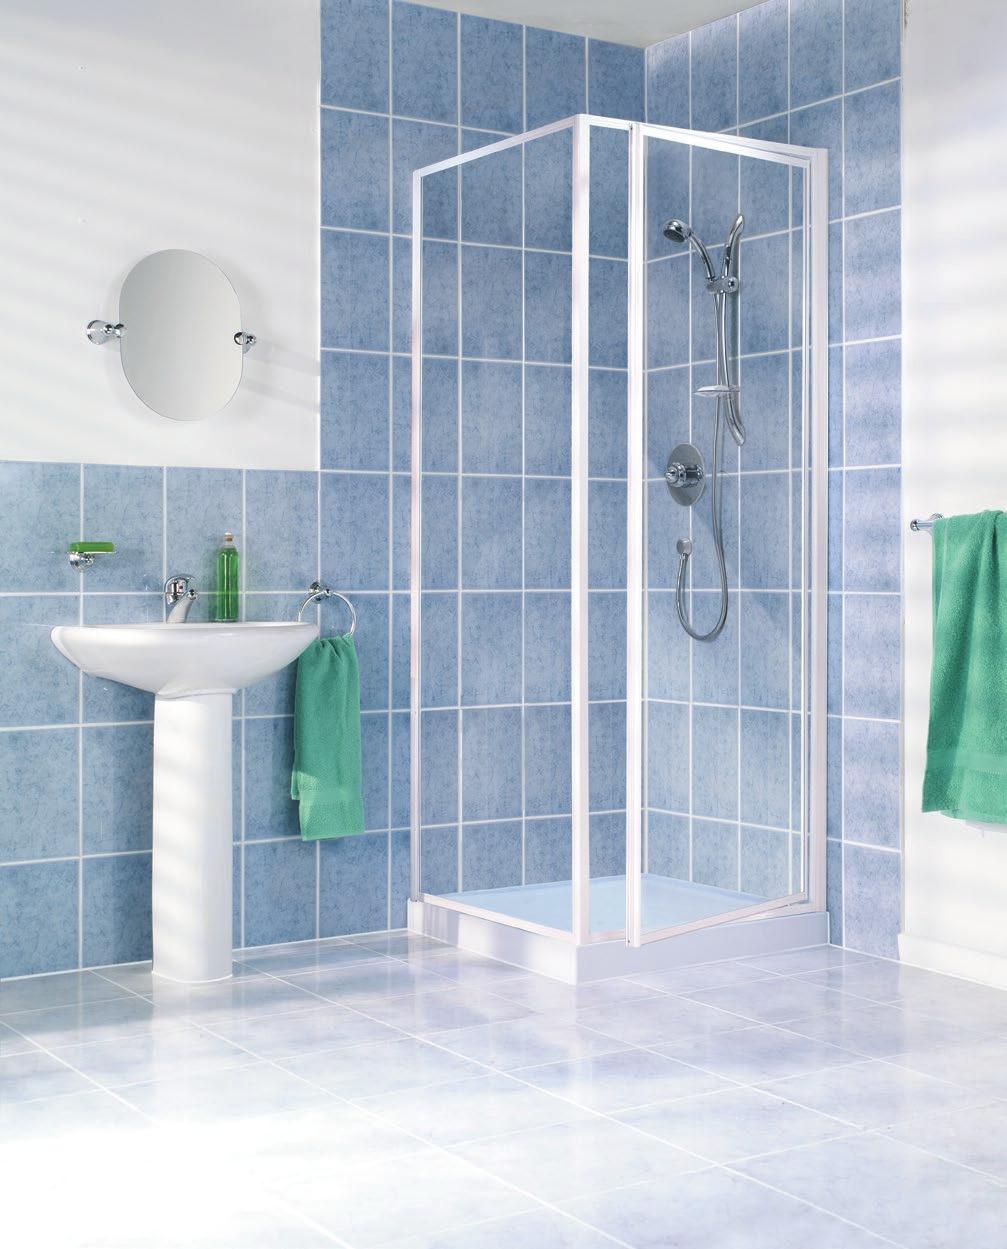 12 223108 Shower Tray 760 x 760mm 59.99 44.99 216991 Pivot Door with White Frame 760mm 114.49 85.